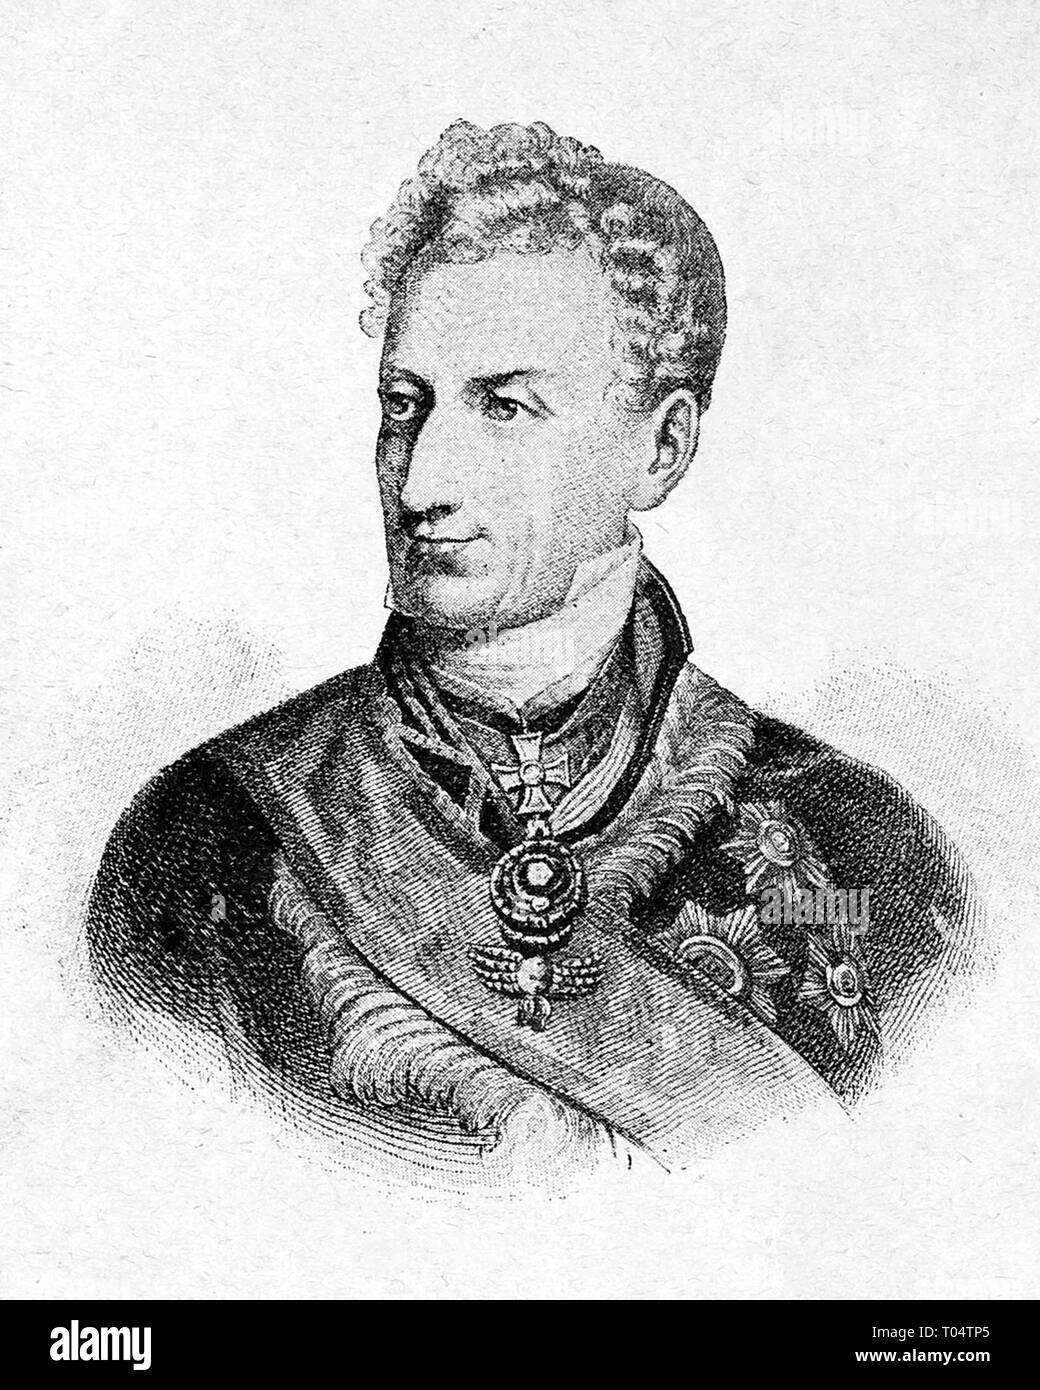 Prince Metternich, Digital improved reproduction from Illustrated overview of the life of mankind in the 19th century, 1901 edition, Marx publishing house, St. Petersburg. Stock Photo